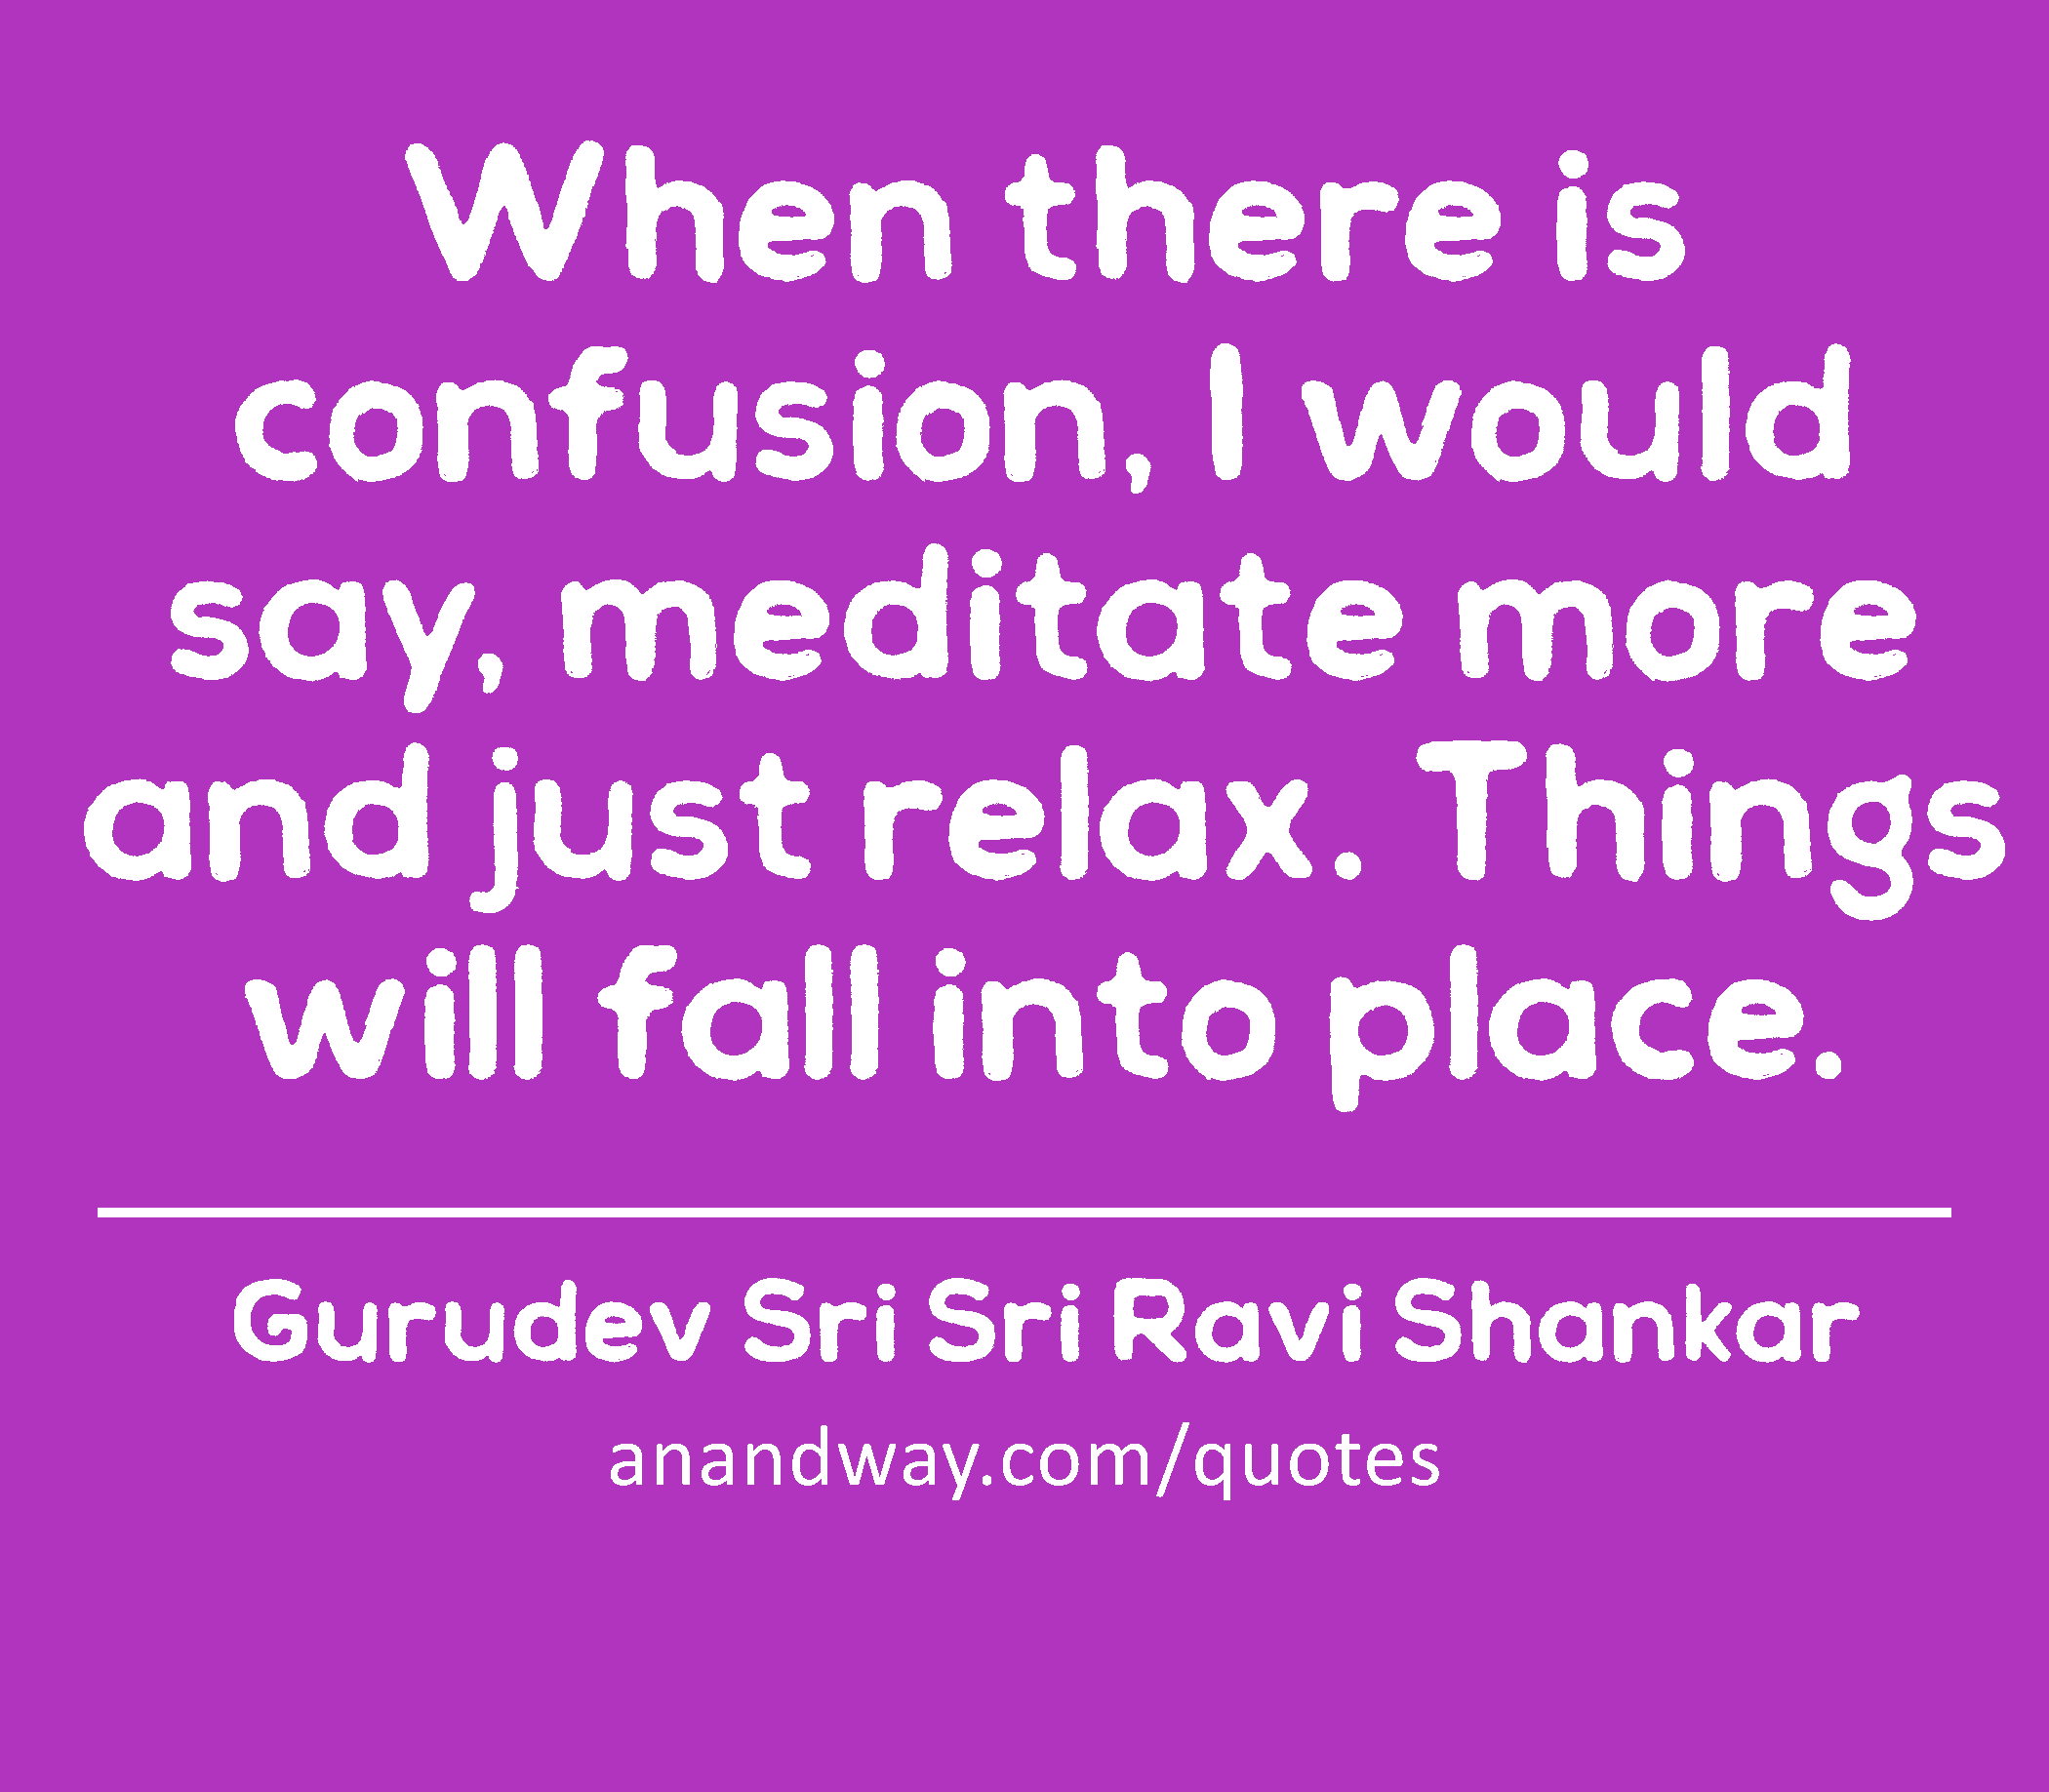 When there is confusion, I would say, meditate more and just relax. Things will fall into place. 
 -Gurudev Sri Sri Ravi Shankar